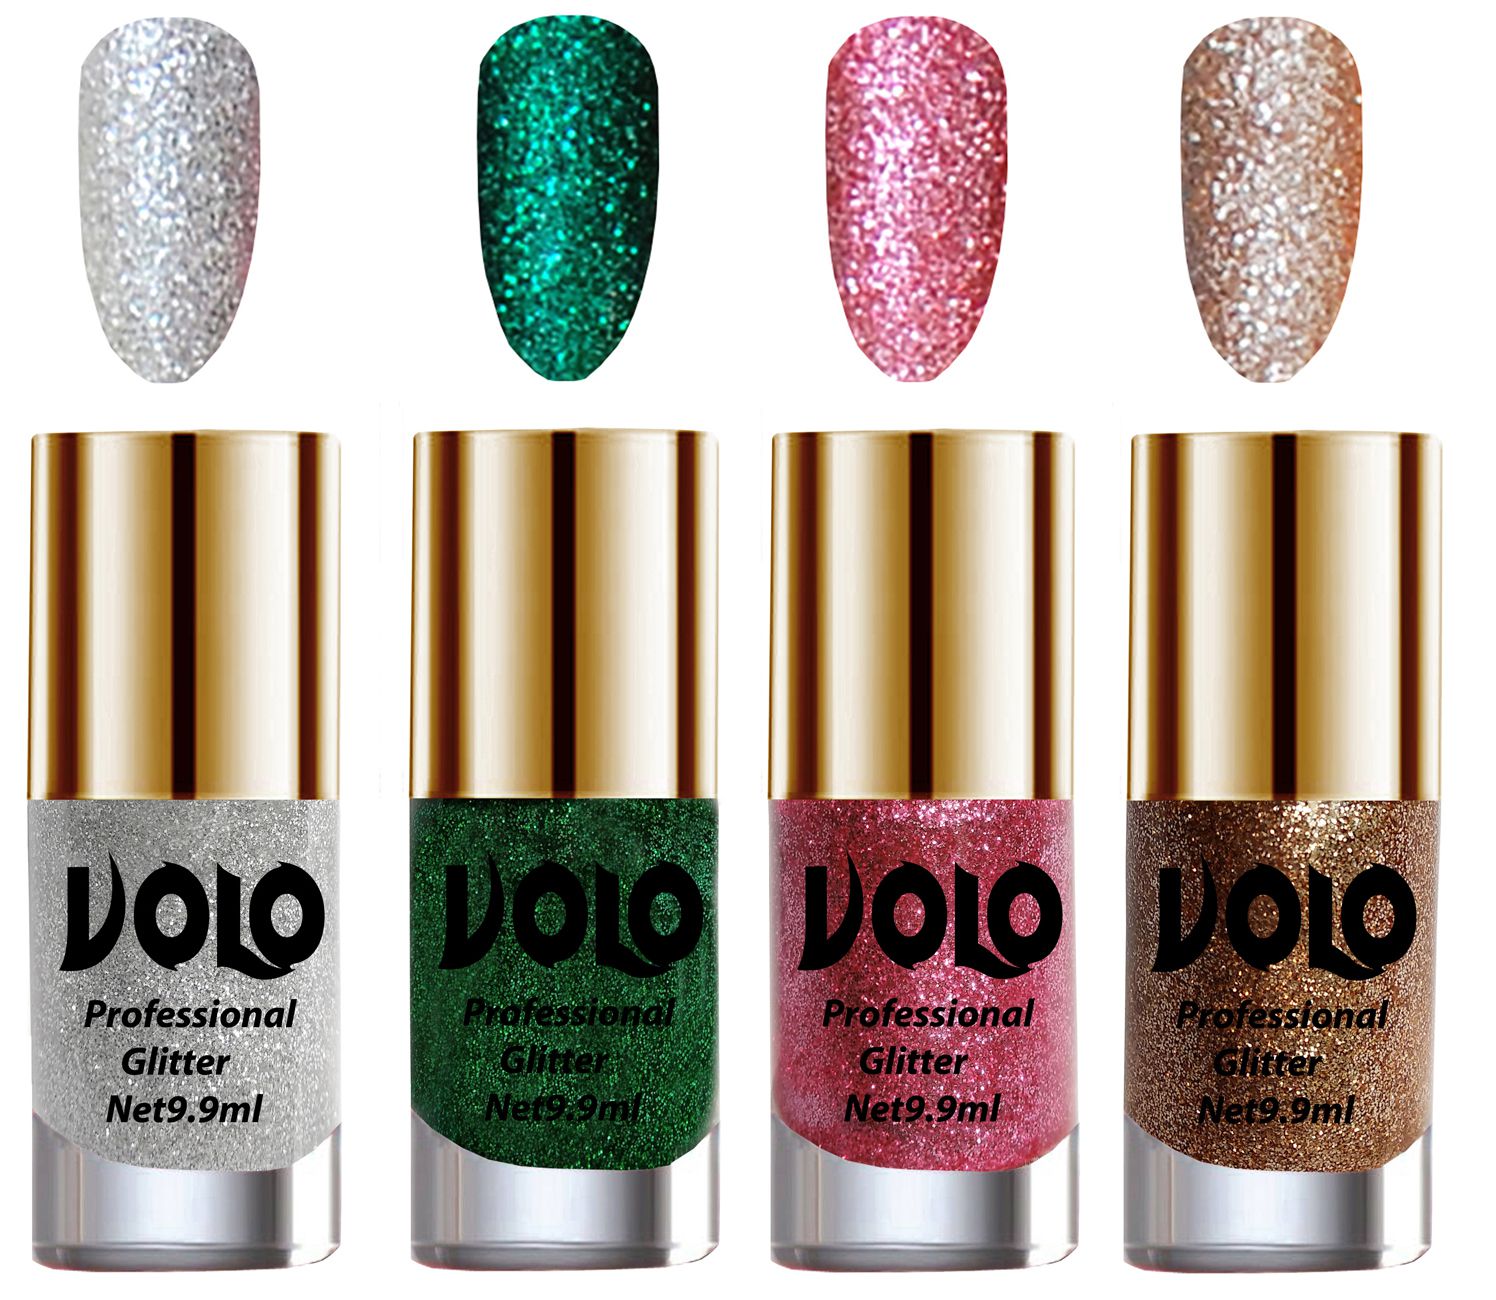     			VOLO Professionally Used Glitter Shine Nail Polish Silver,Green,Pink Gold Pack of 4 39 mL